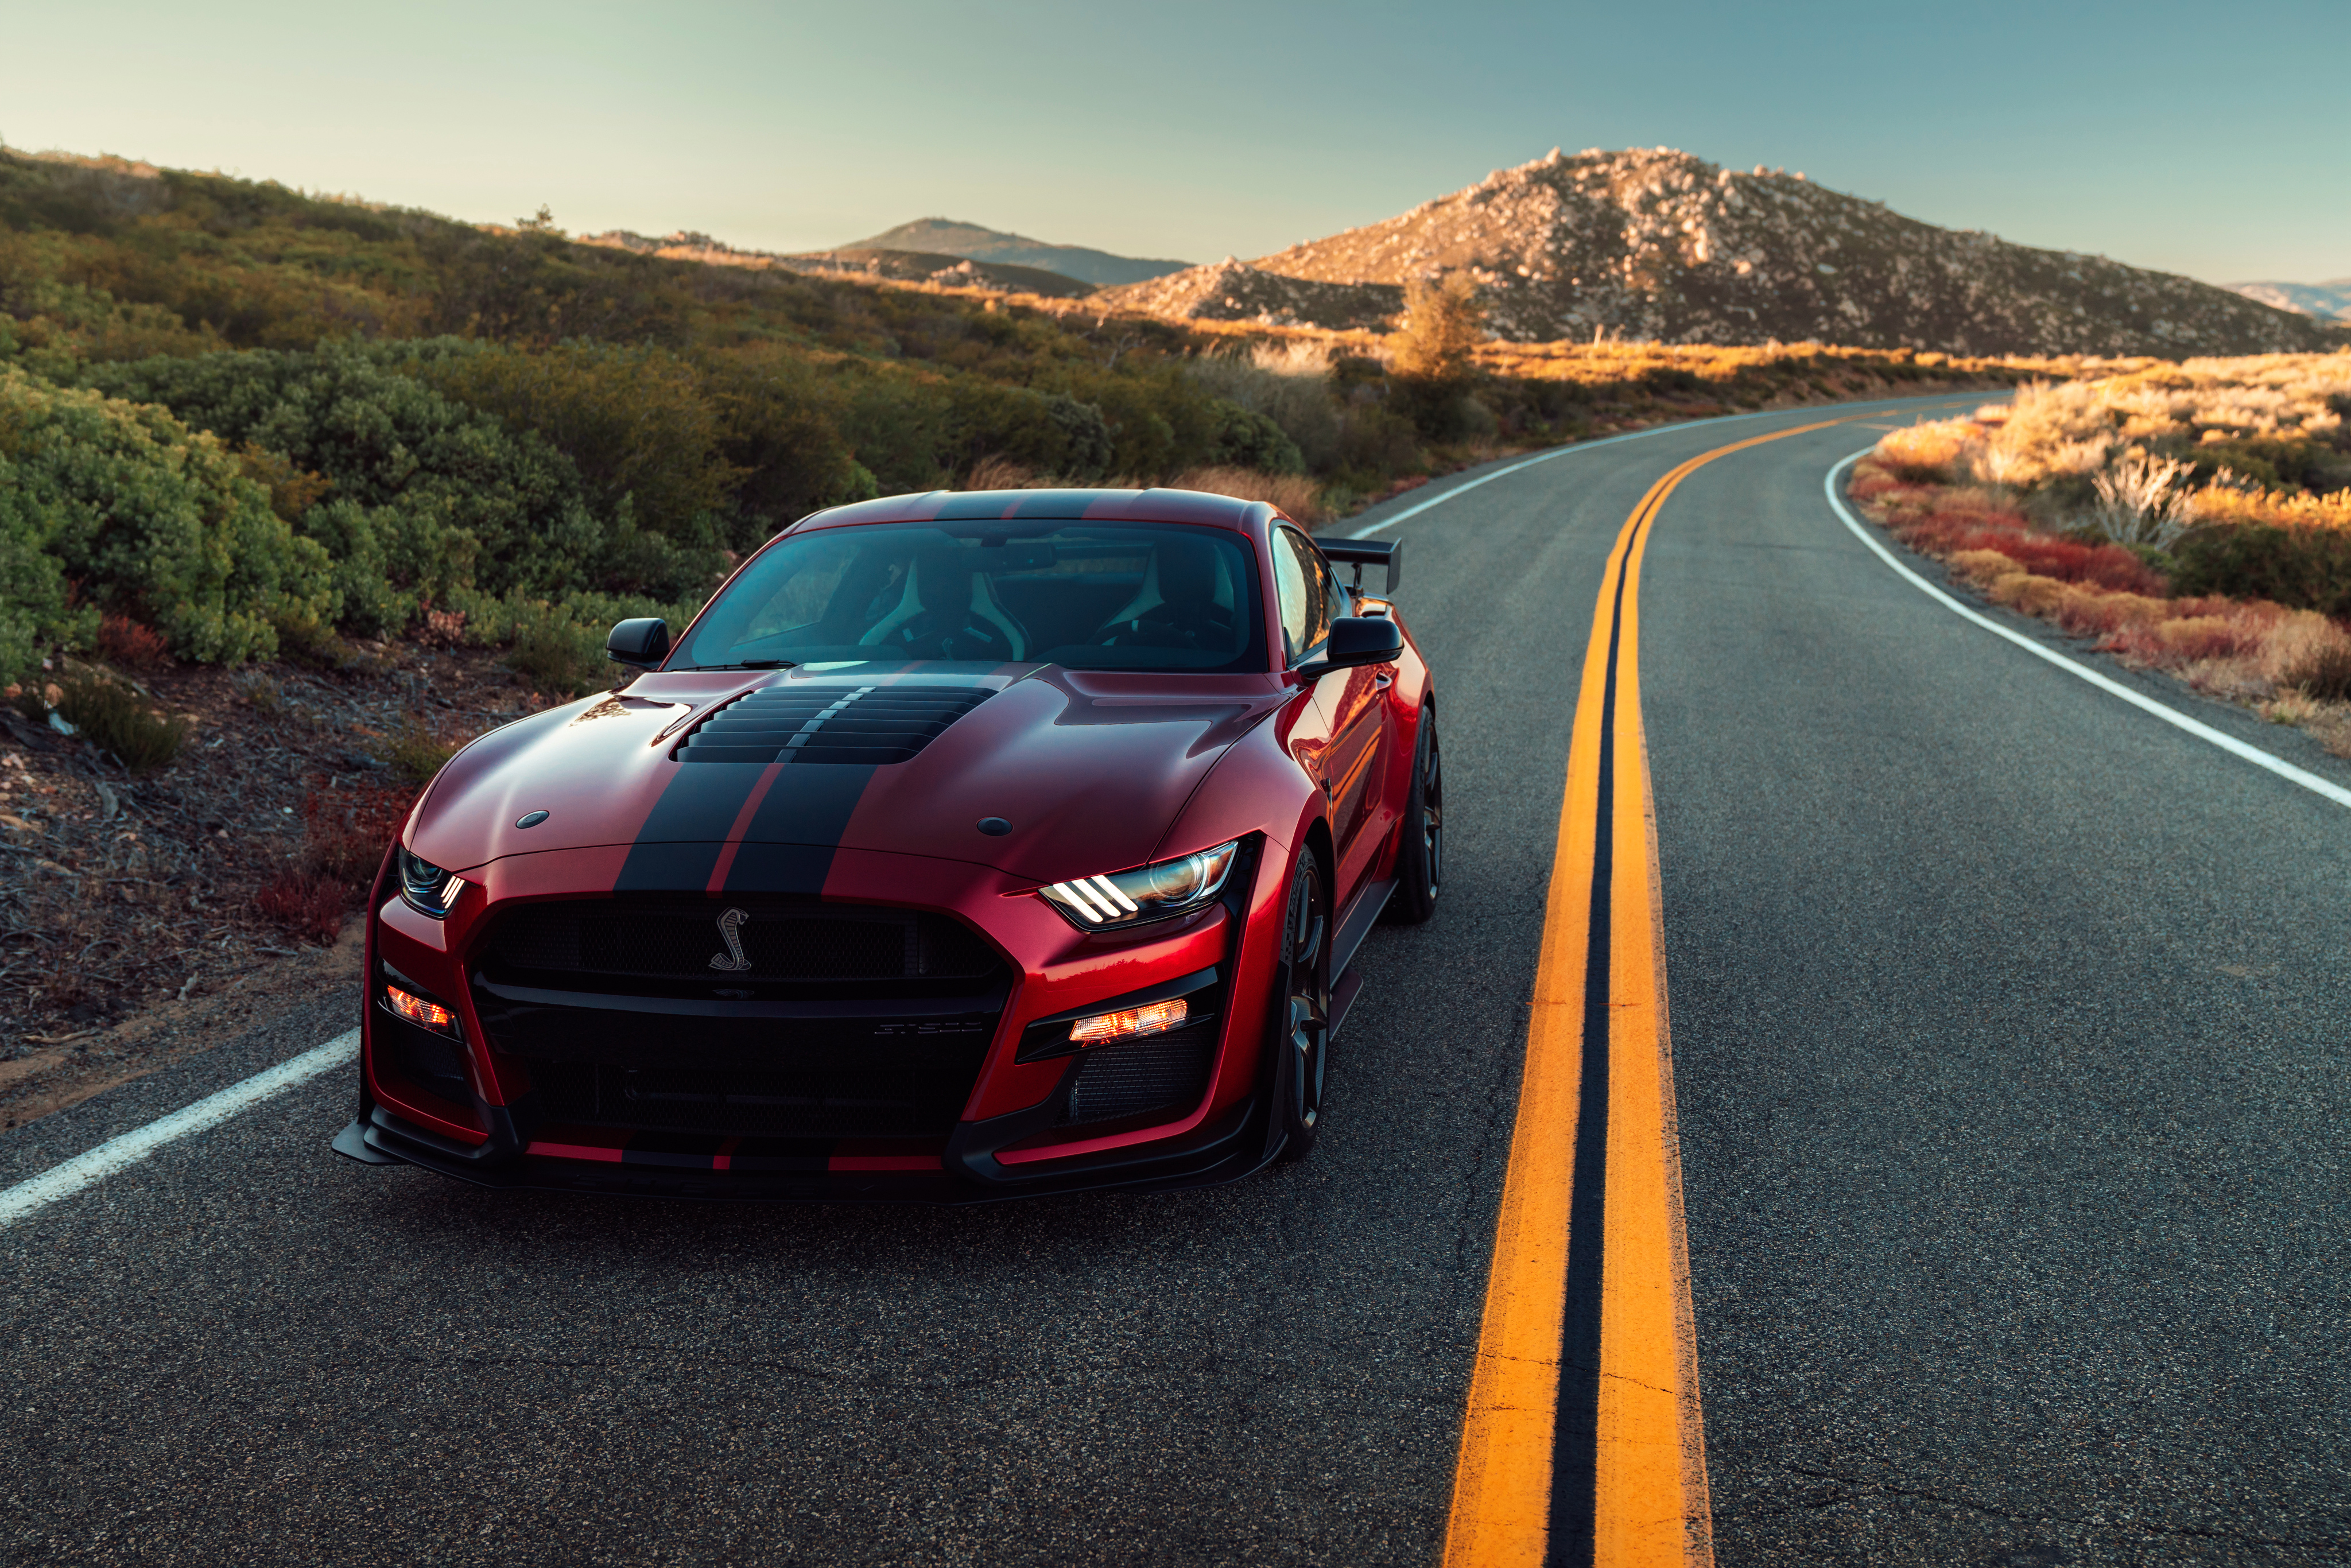 2020 Ford Mustang Shelby Gt500 4k Hd Cars 4k Wallpapers Images Backgrounds Photos And Pictures